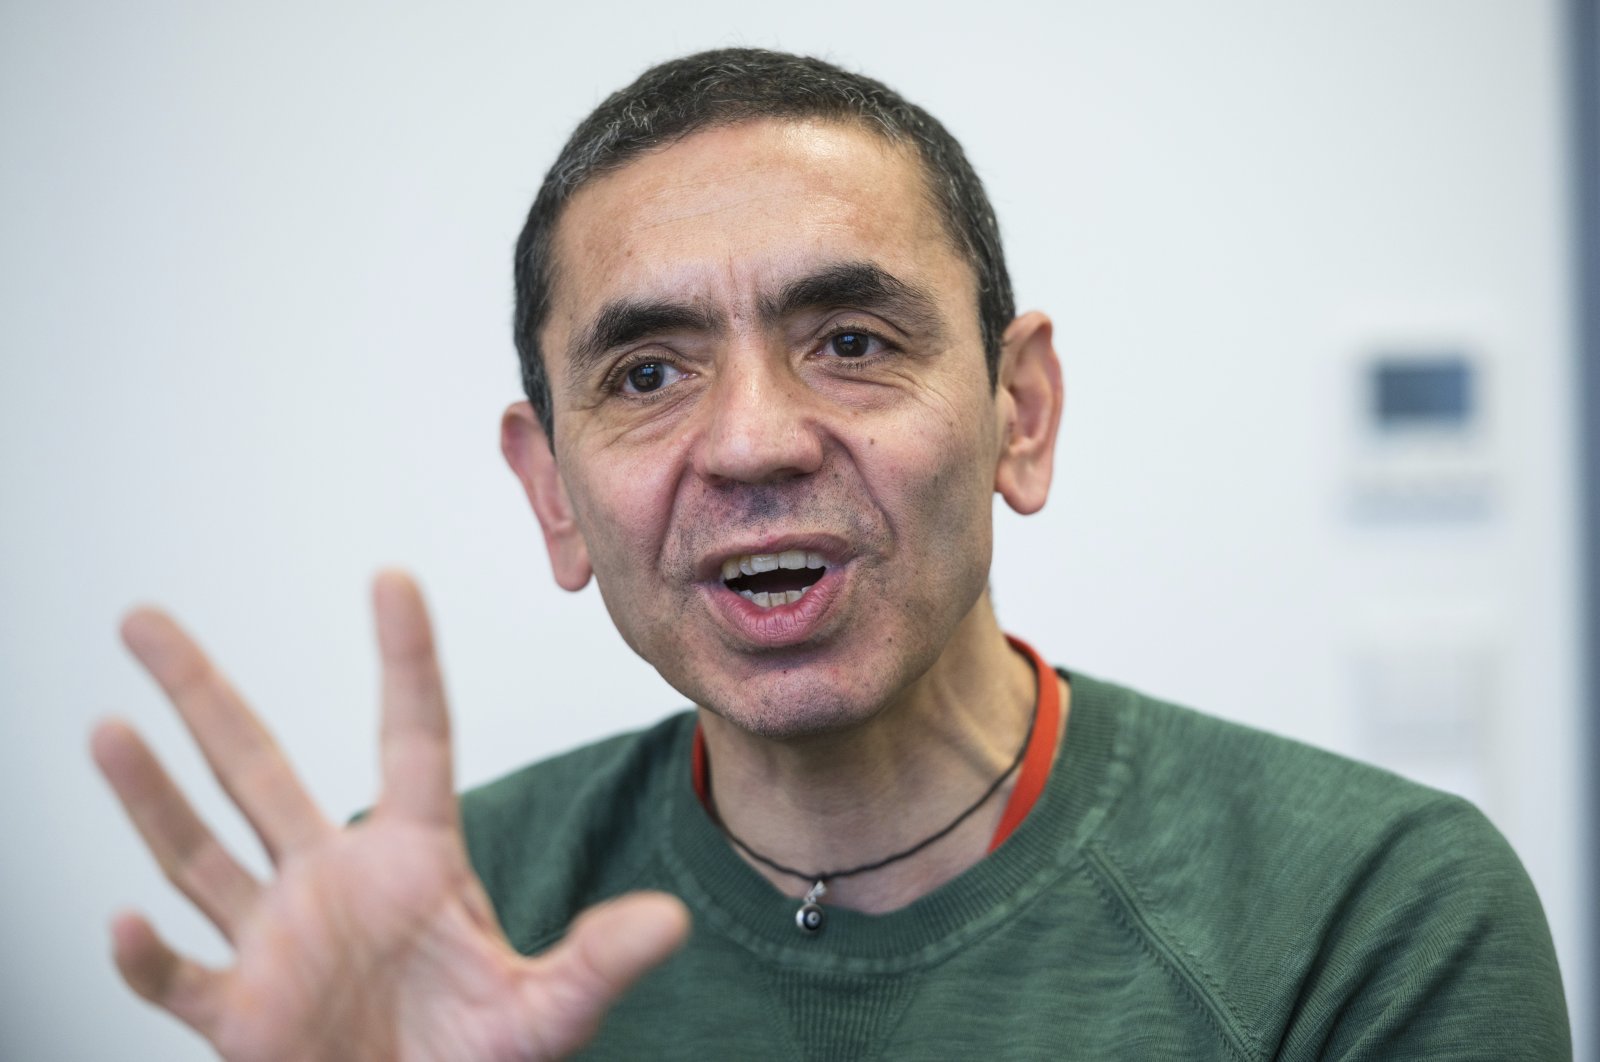 Uğur Şahin, CEO of BioNTech, gestures during an interview in Mainz, Germany, Nov. 27, 2019. (dpa via AP)